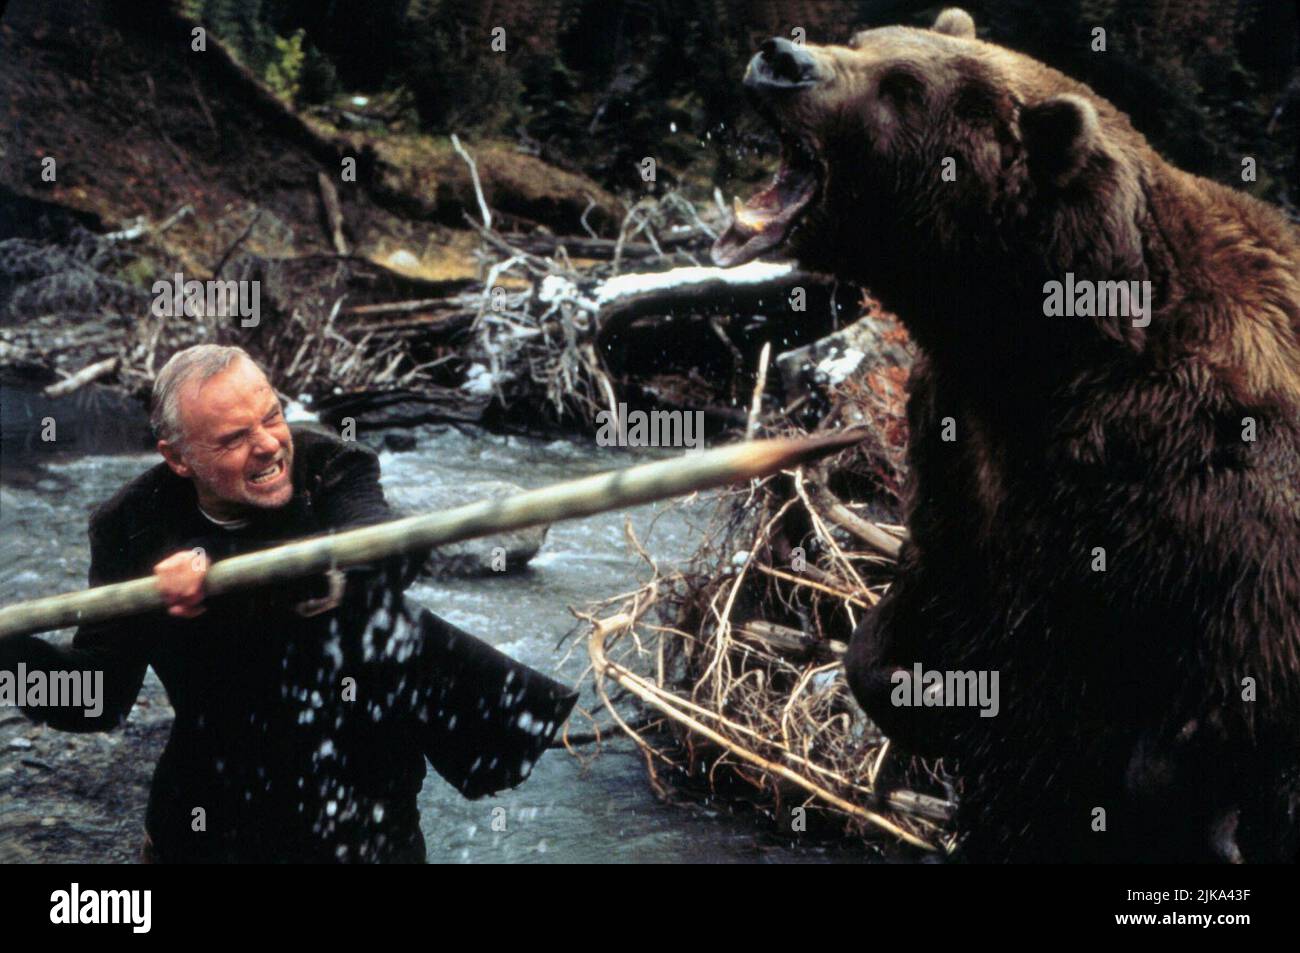 anthony-hopkins-bear-film-the-edge-1997-characters-charles-morse-director-lee-tamahori-06-september-1997-warning-this-photograph-is-for-editorial-use-only-and-is-the-copyright-of-20-century-fox-andor-the-photographer-assigned-by-the-film-or-production-company-and-can-only-be-reproduced-by-publications-in-conjunction-with-the-promotion-of-the-above-film-a-mandatory-credit-to-20-century-fox-is-required-the-photographer-should-also-be-credited-when-known-no-commercial-use-can-be-granted-without-written-authority-from-the-film-company-2JKA43F.jpg